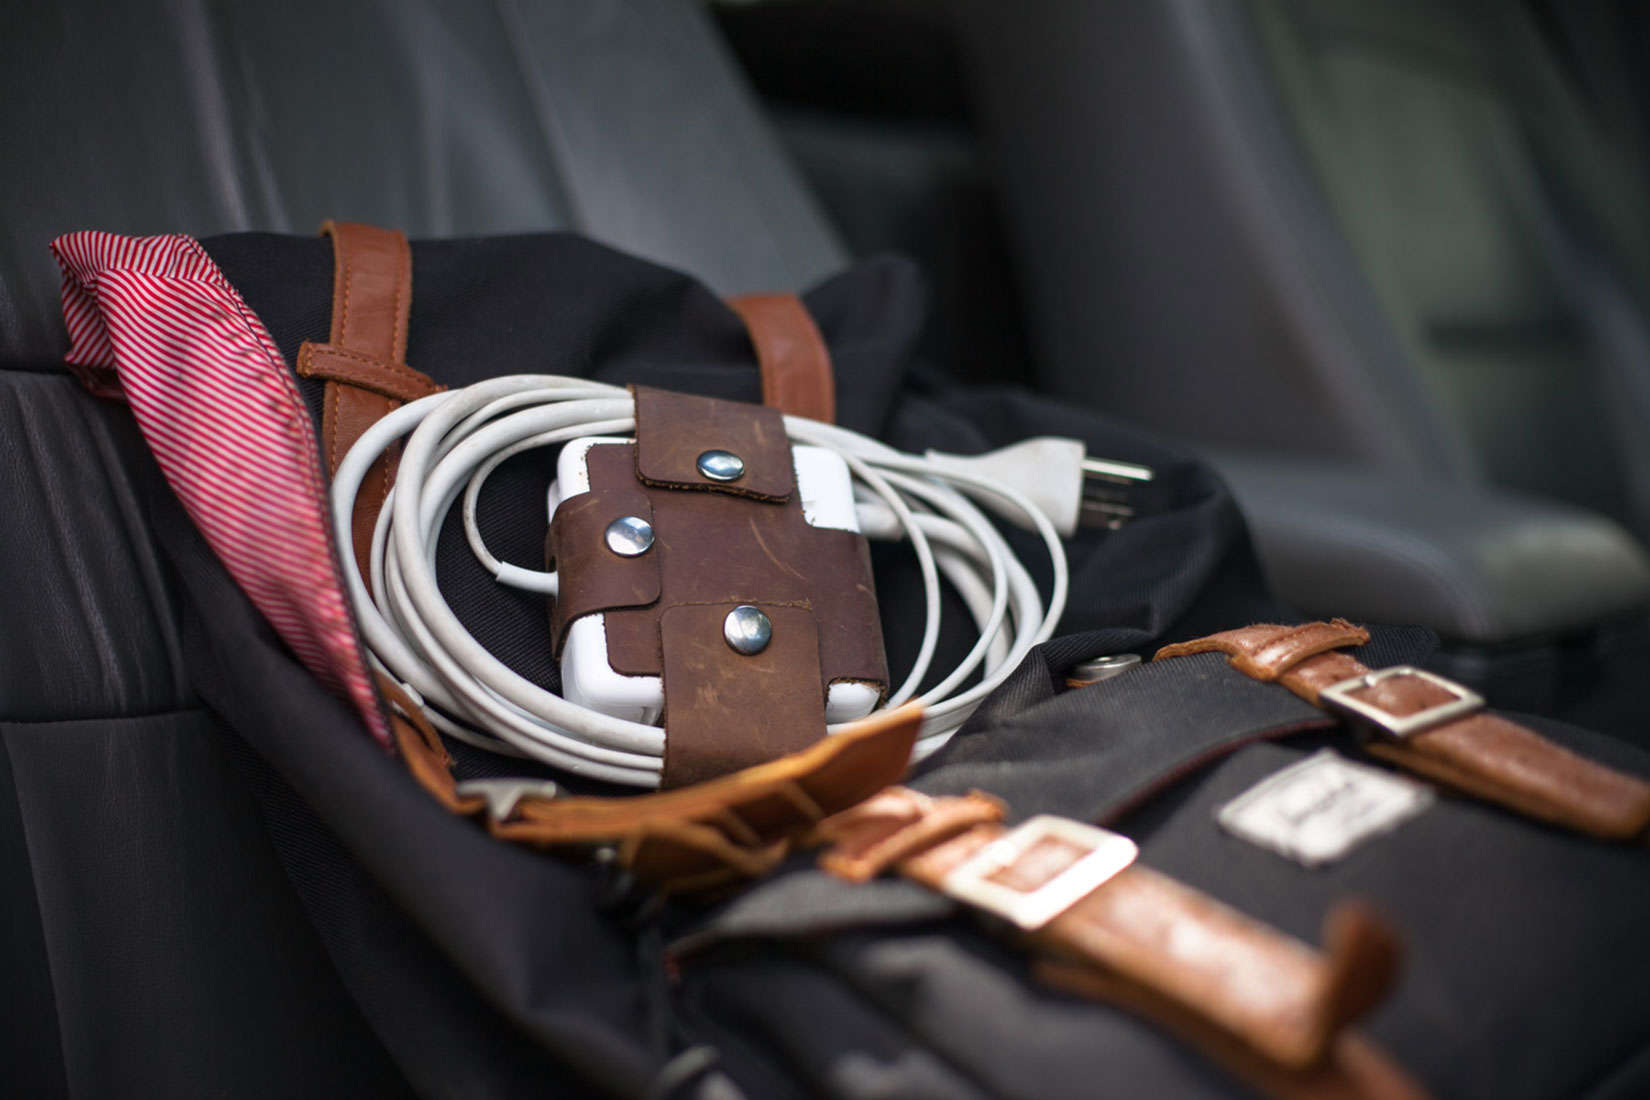 Your MacBook charging cable won't get away from you with the Hula Wrap.